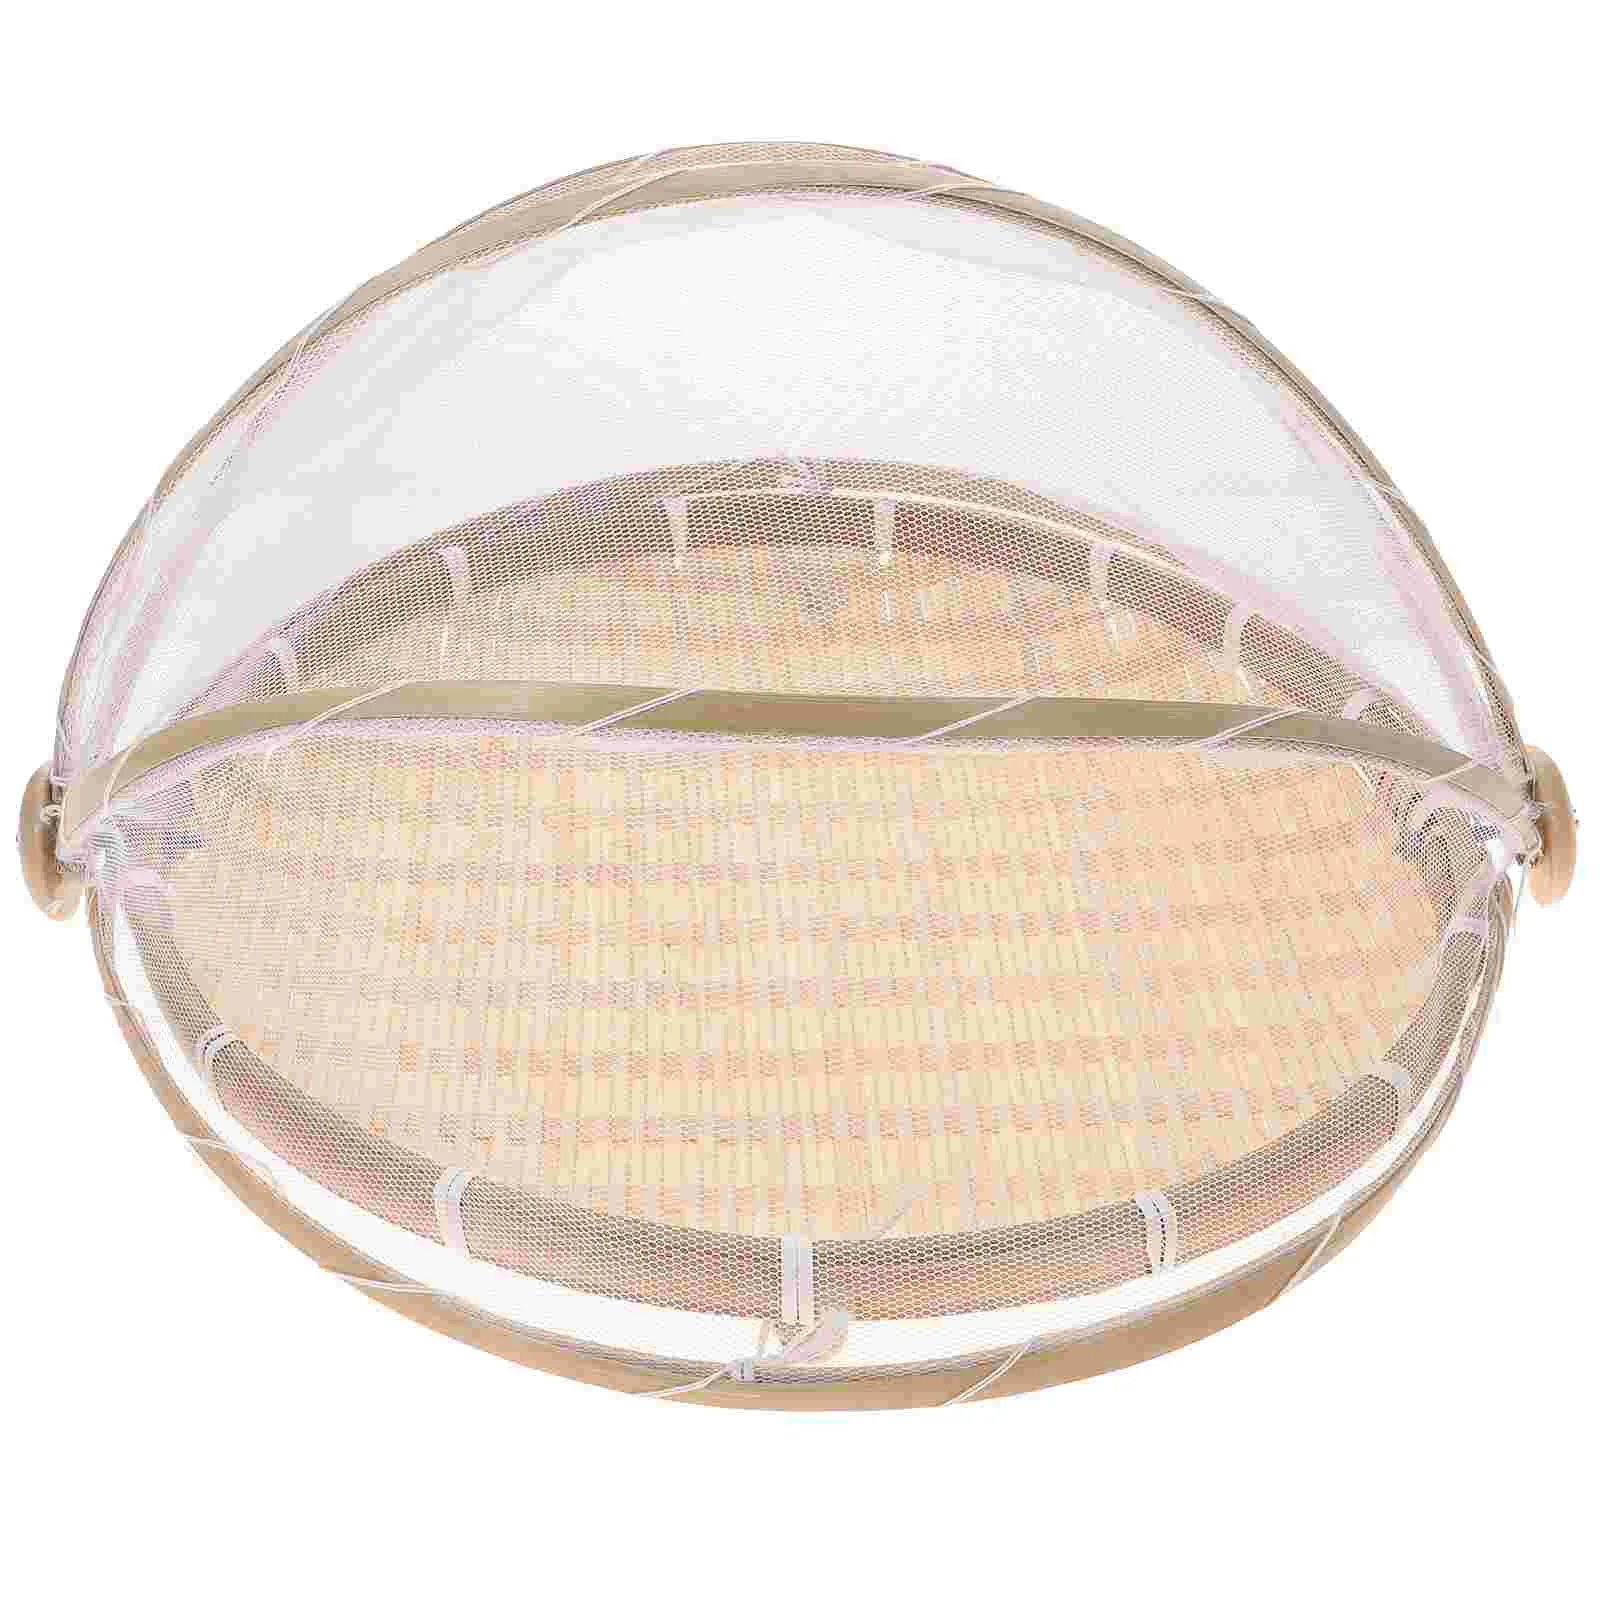 

Net Cover Bamboo Basket Woven Multi-purpose Manual Food Drying Dustpan Sieve Household Craft Steamed Bun Fruit Trays